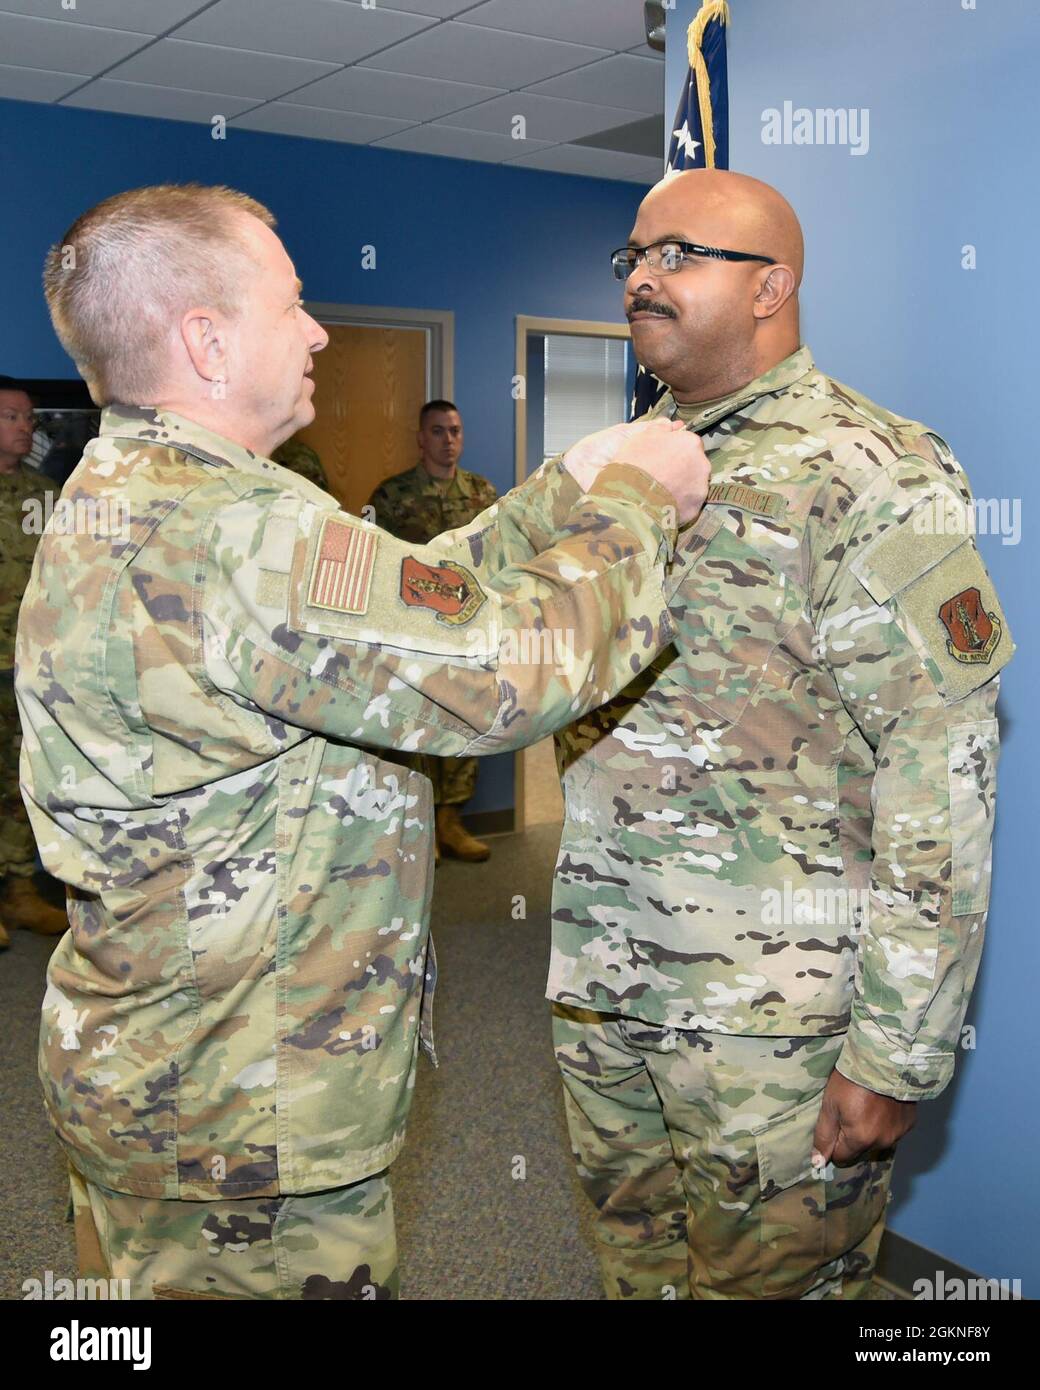 SELFRIDGE AIR NATIONAL GUARD BASE, Mich.— Sr. Master Sgt. Maurice Graves, 127th Wing human resource advisor here,  is awarded the Meritorious Service Medal by Brig. Gen. Rolf E. Mammen, 127th Wing commander here, on June 5, 2021. Stock Photo